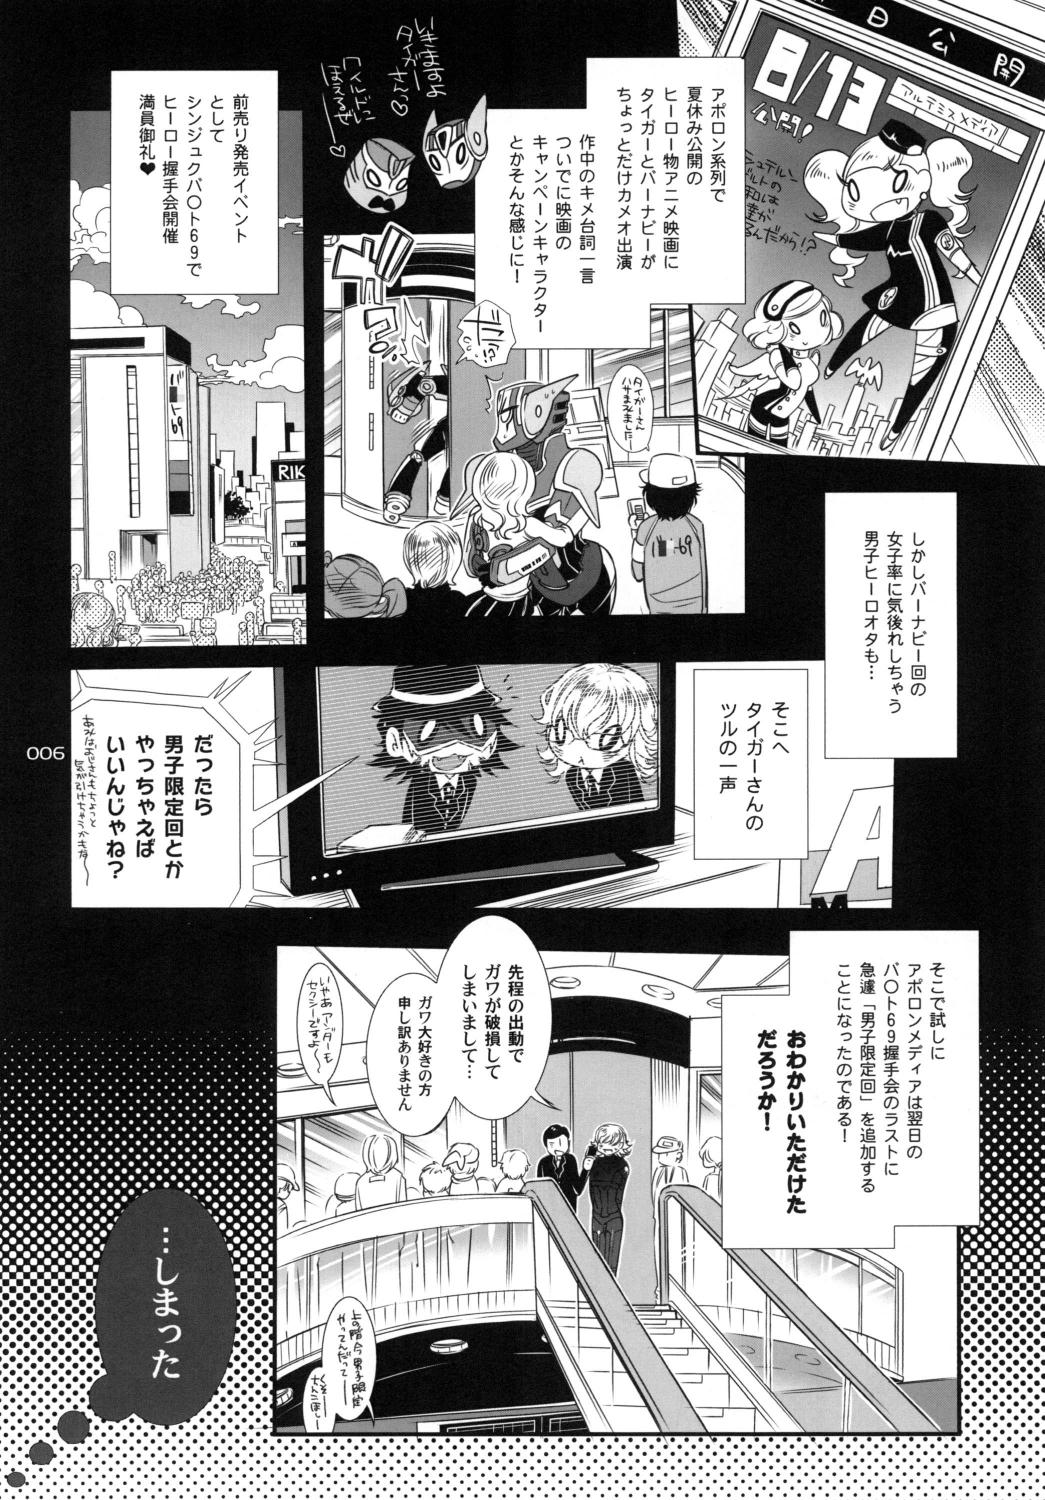 Boss バ○ト69で僕と握手! - Tiger and bunny Shaven - Page 6